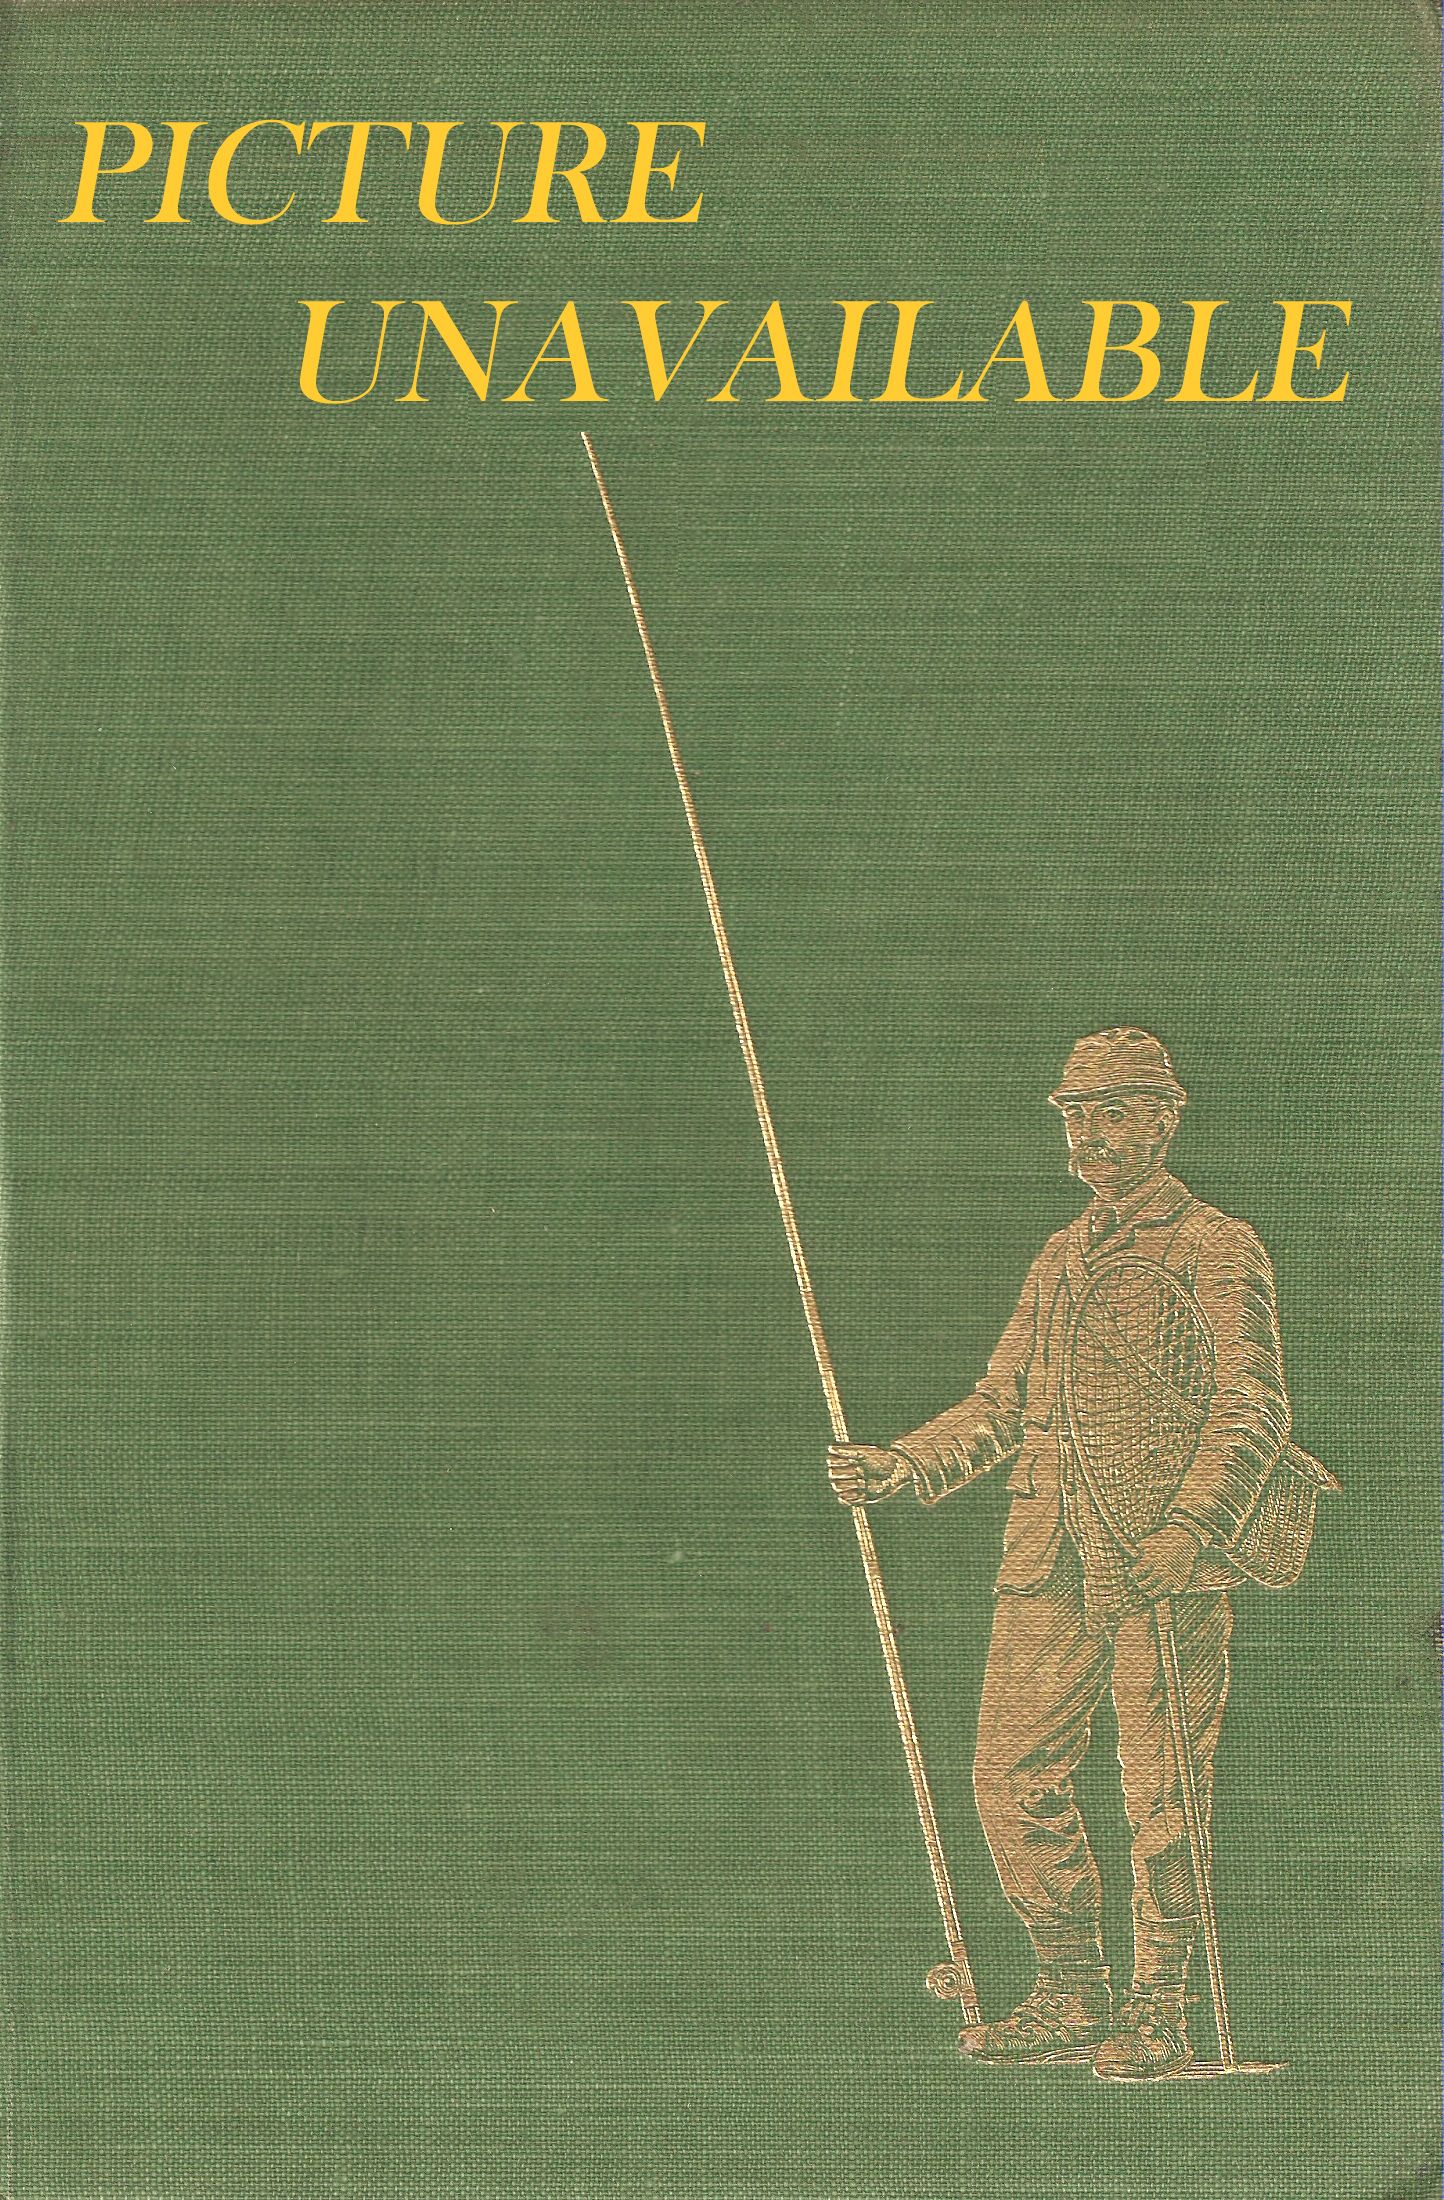 THE COMPLETE CARP ANGLER. By Andy Little.